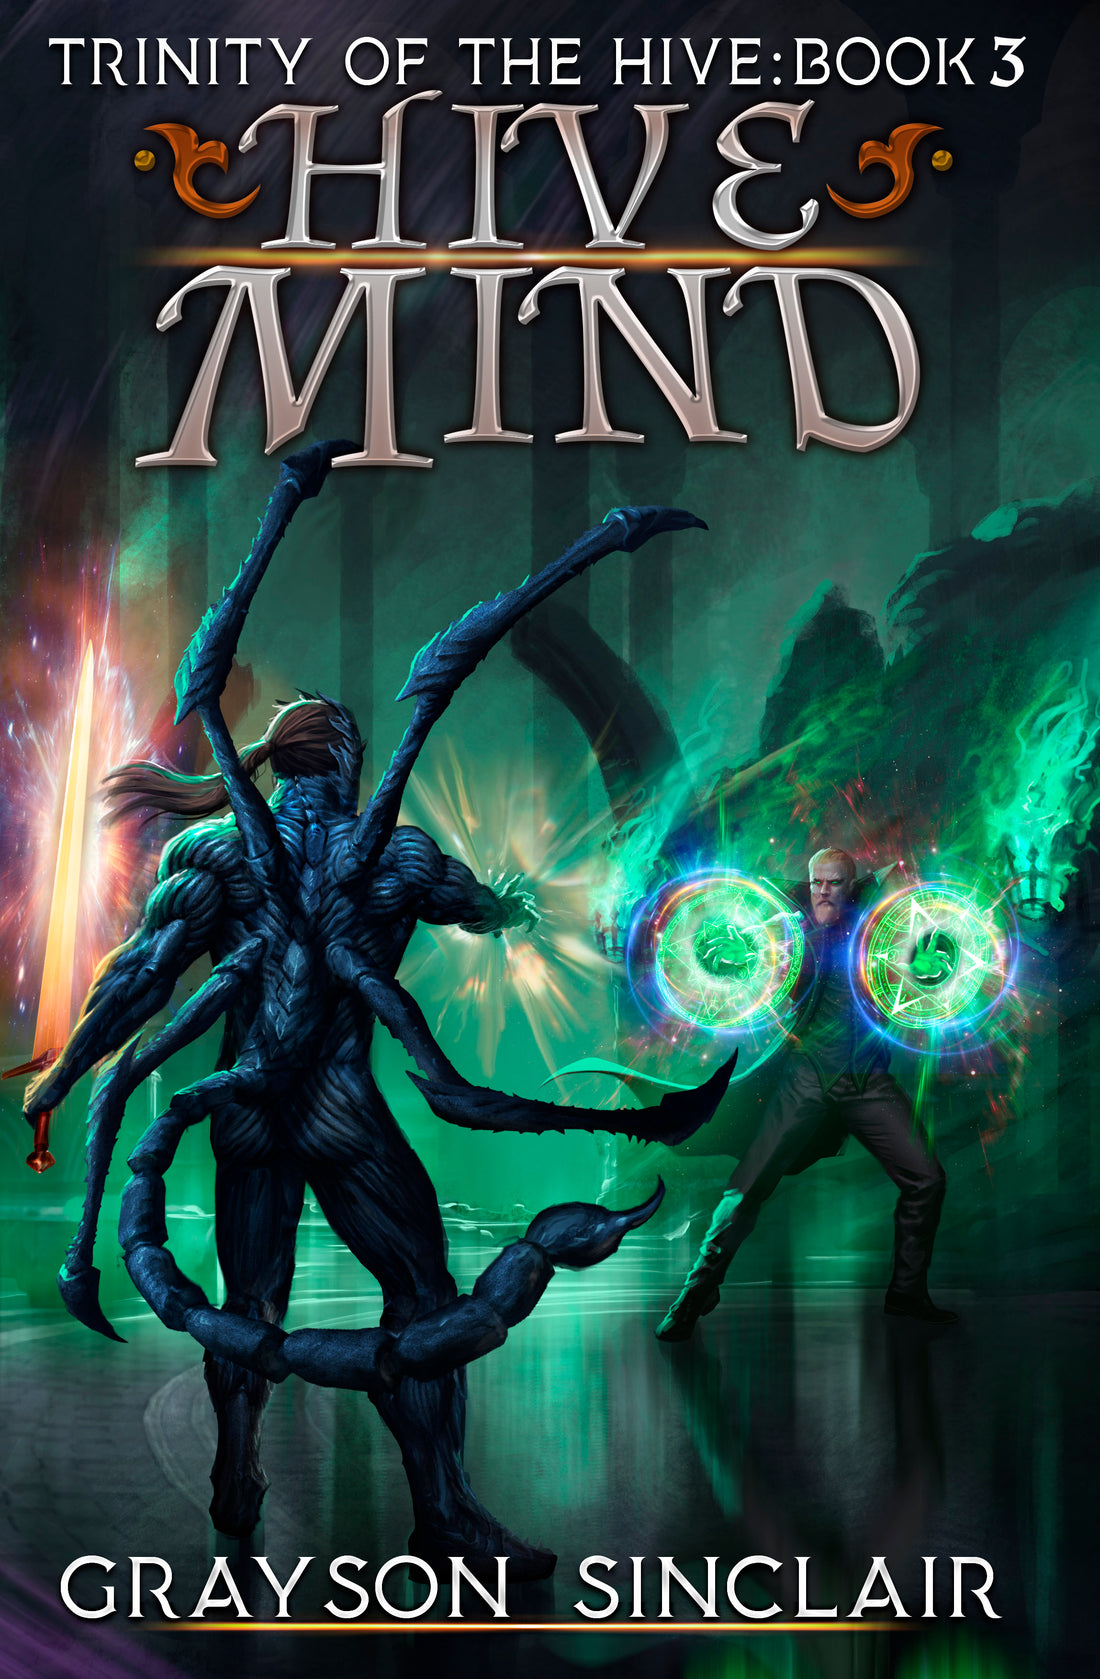 Hive Mind is Released!